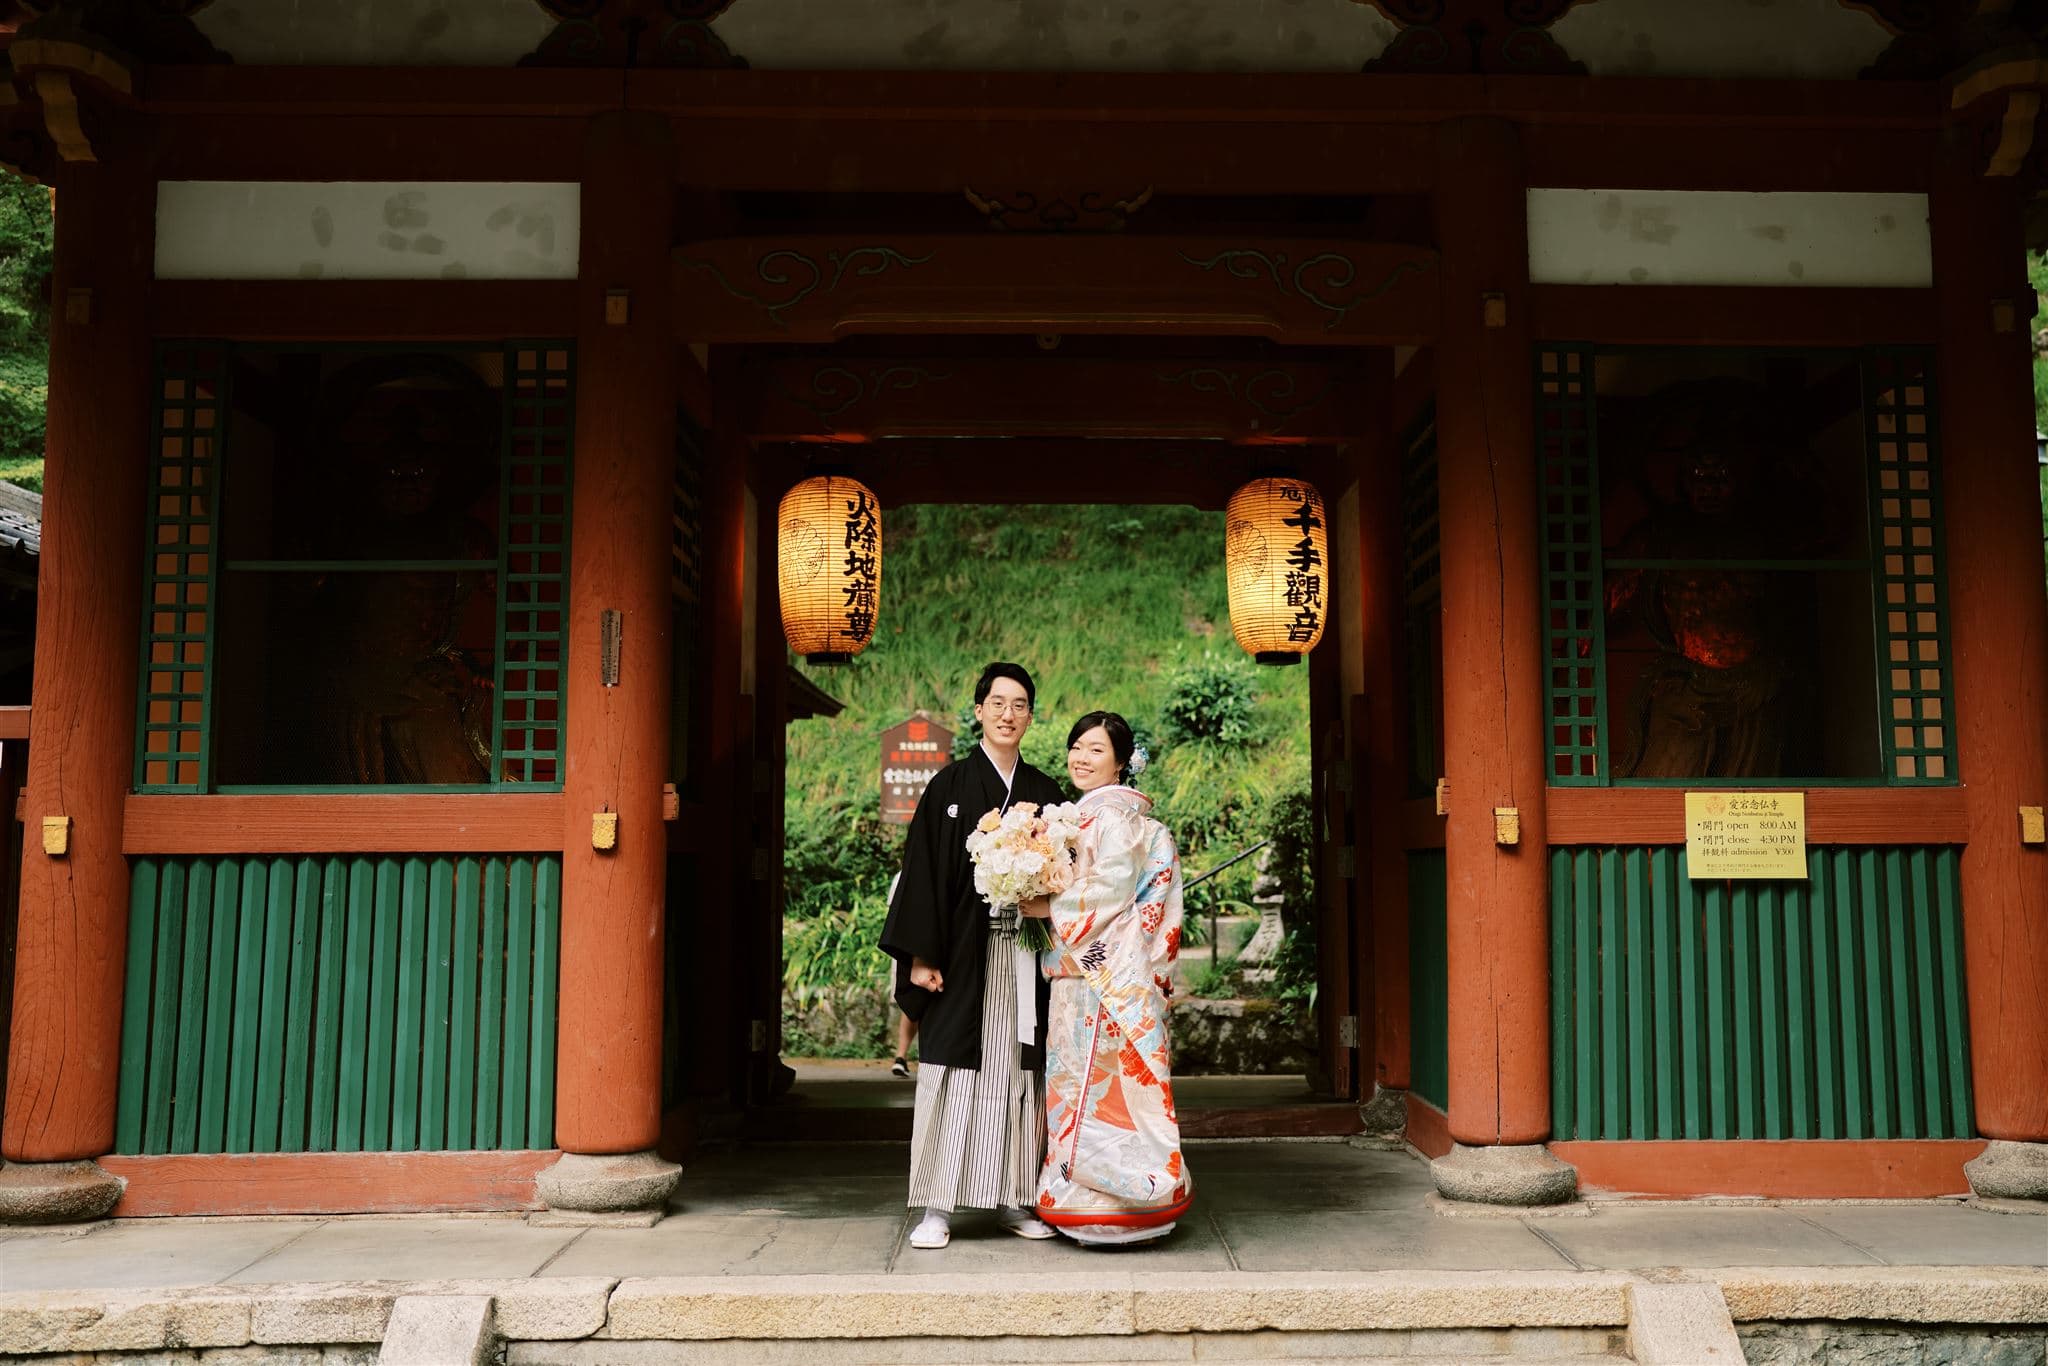 Japan Elopement Wedding Photographer, Planner & Videographer | A couple in kimono standing in front of a wedding shrine in Japan.